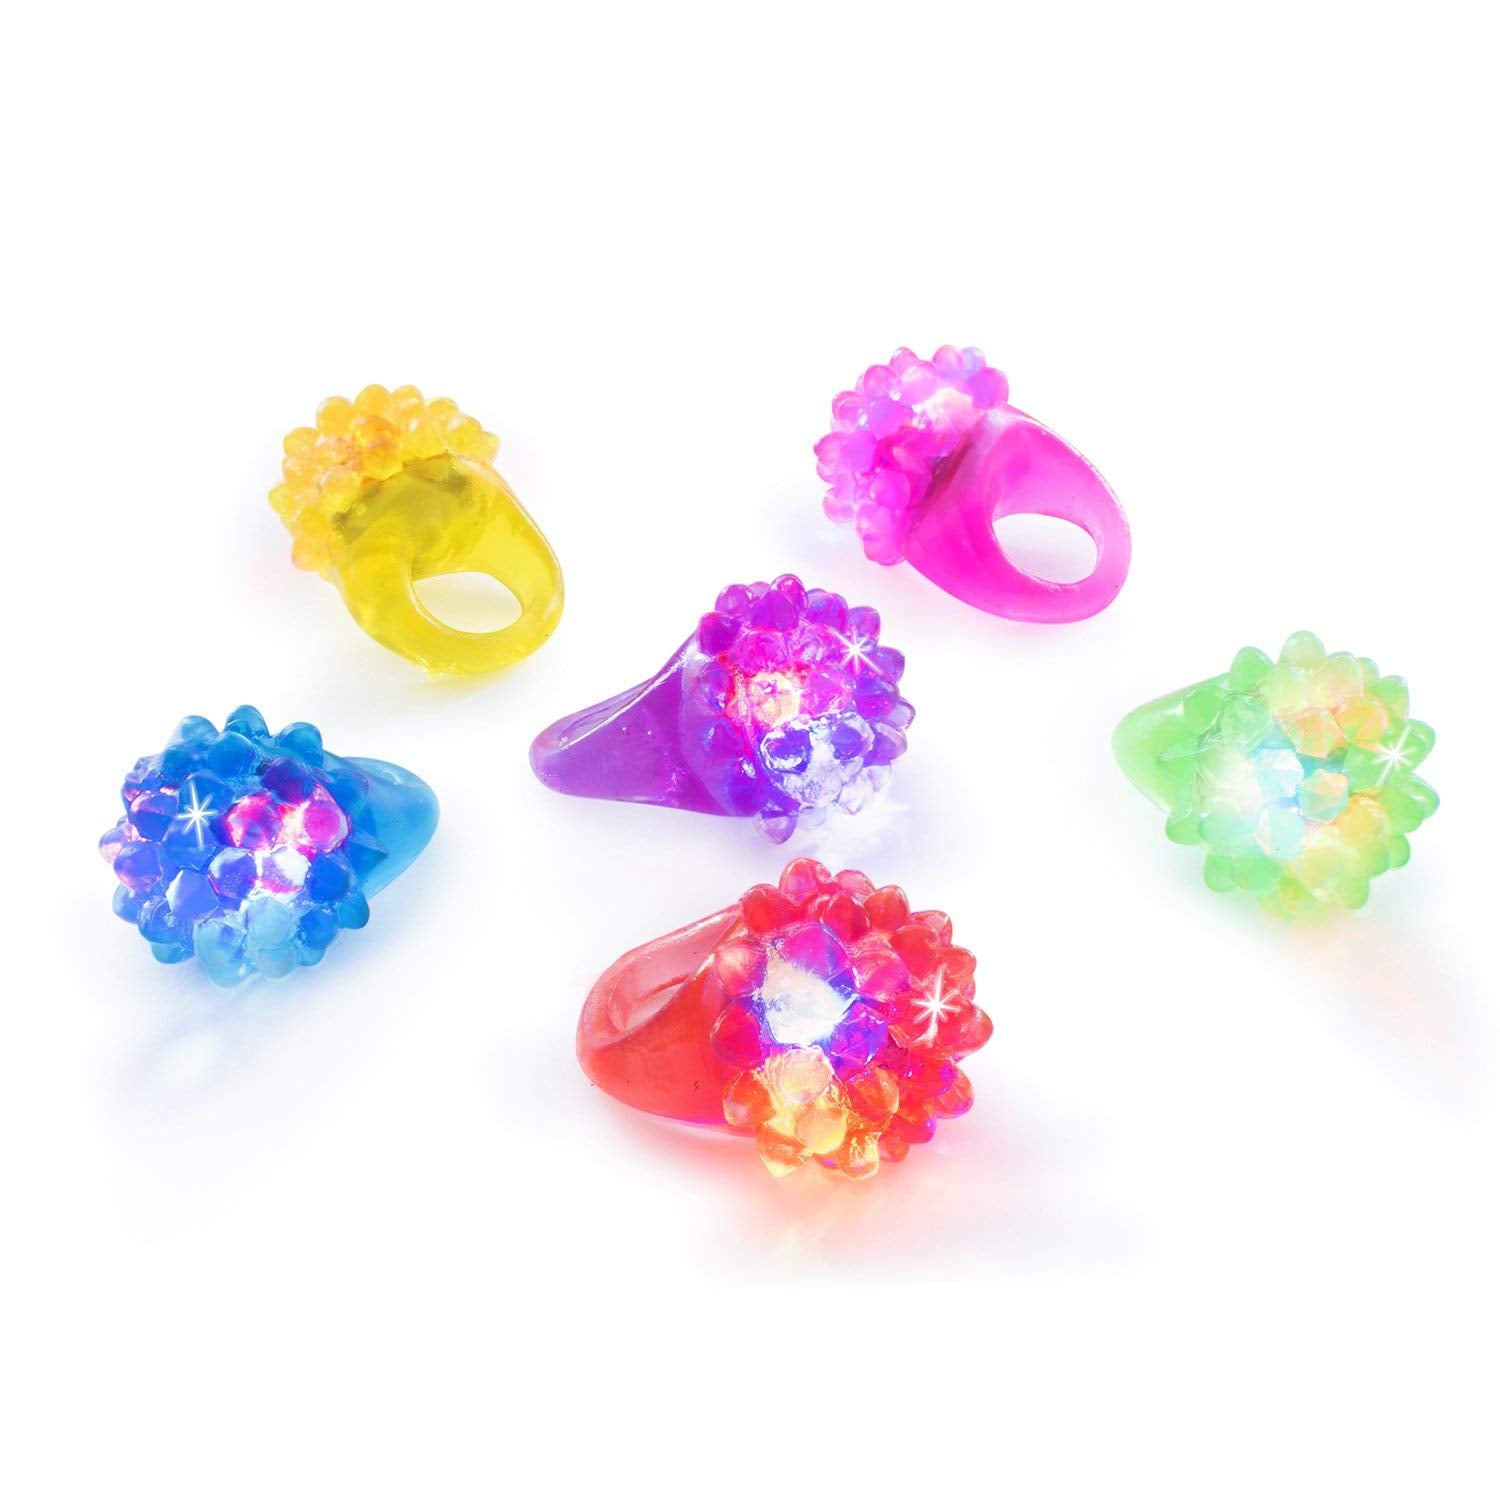 Flashing Colorful LED Light Up Bumpy Jelly Rubber Rings Finger Toys for Parties, Event Favors, Raves, Concert Shows, Gifts (18 Pack)